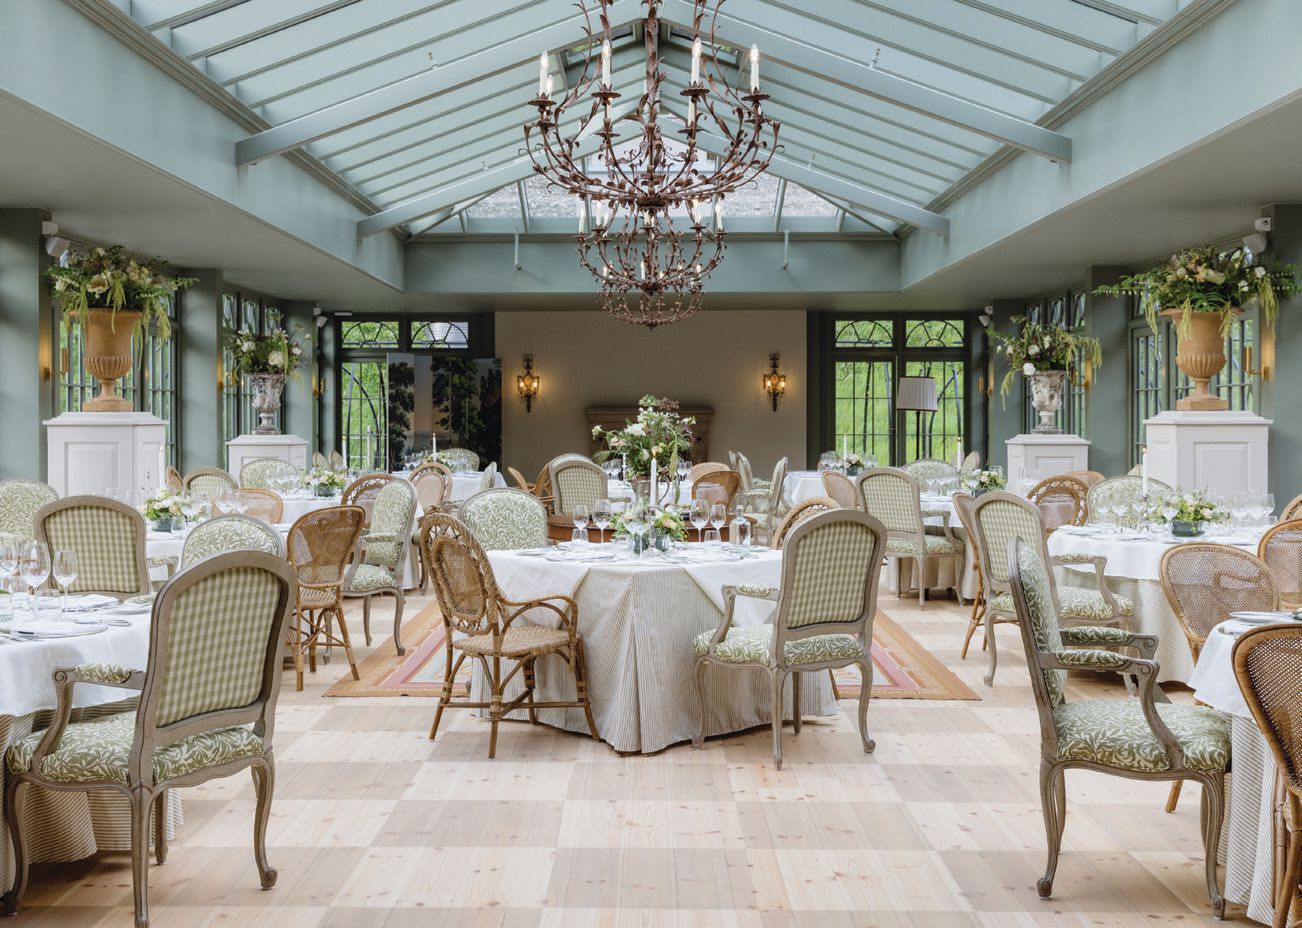 upscale dining takes place at the hotel’s Conservatory.  SOMMERRO HOUSE PHOTO BY FRANCISCO NOGUEIRA